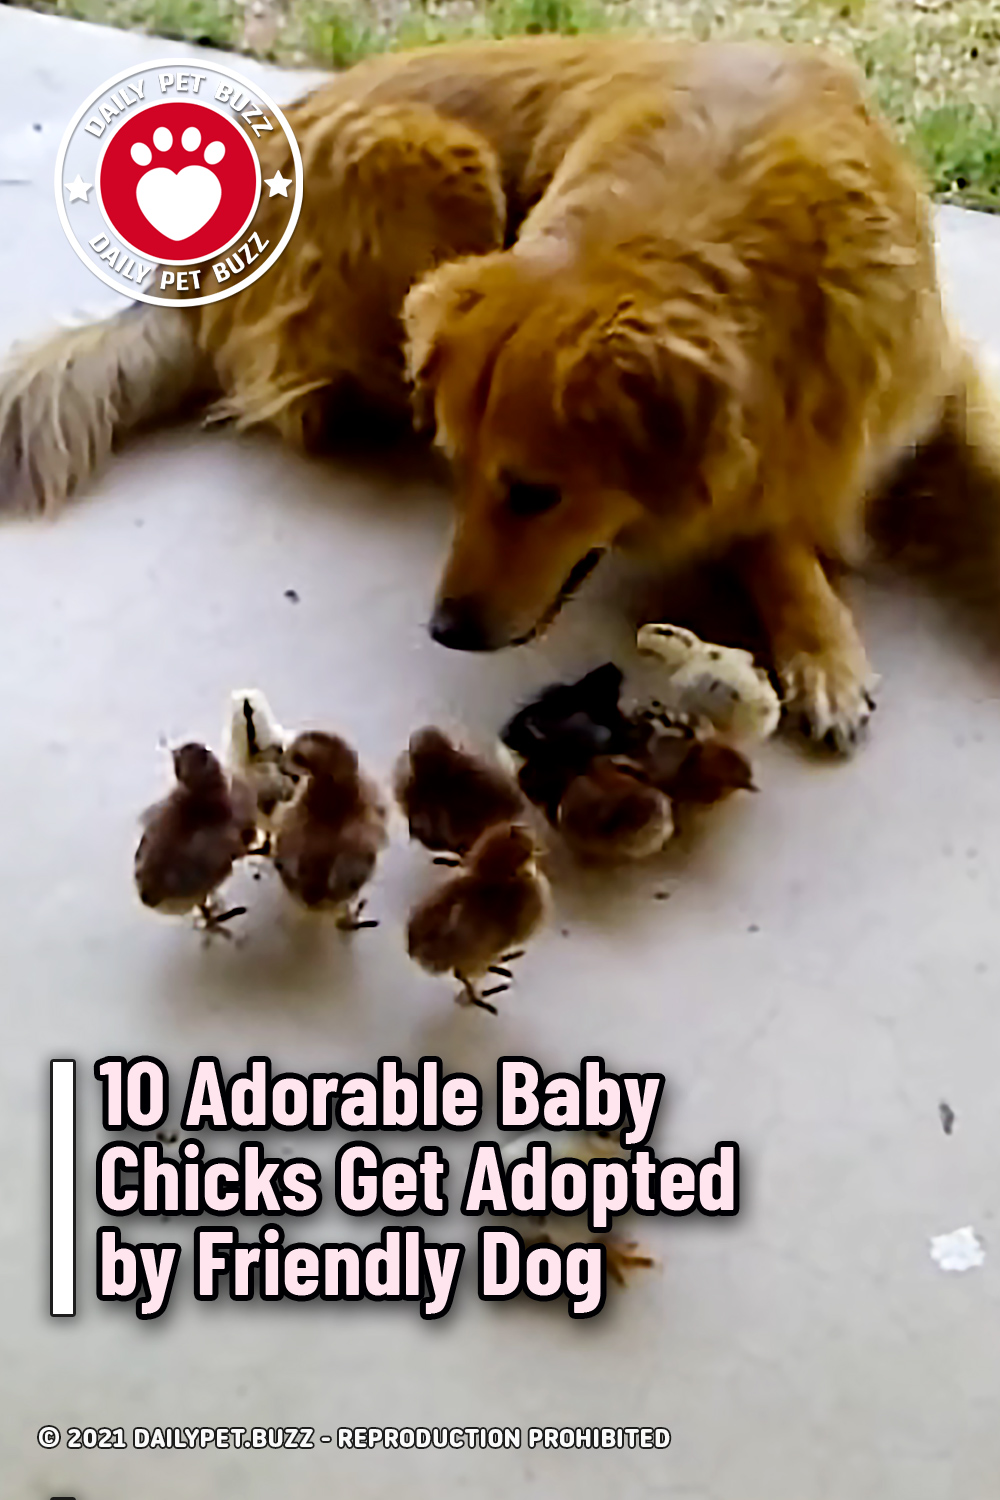 10 Adorable Baby Chicks Get Adopted by Friendly Dog